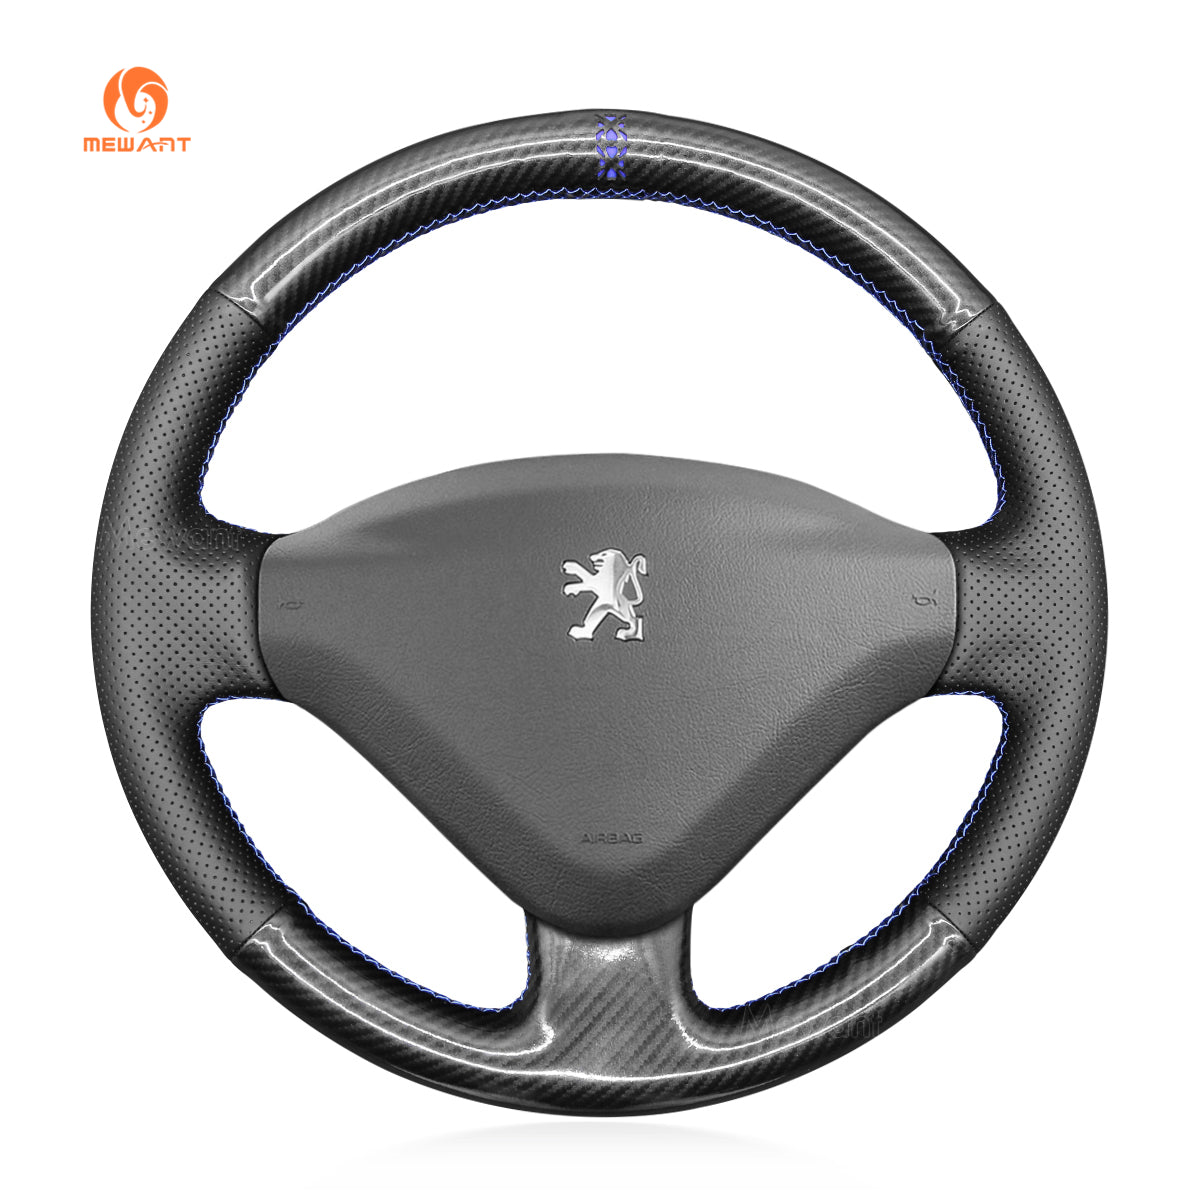 MEWANT Hand Stitch Car Steering Wheel Cover for Peugeot 206(plus) 207 (CC SW) Expert Partner / for Citreon Berlingo Jumpy / for Fiat Scudo